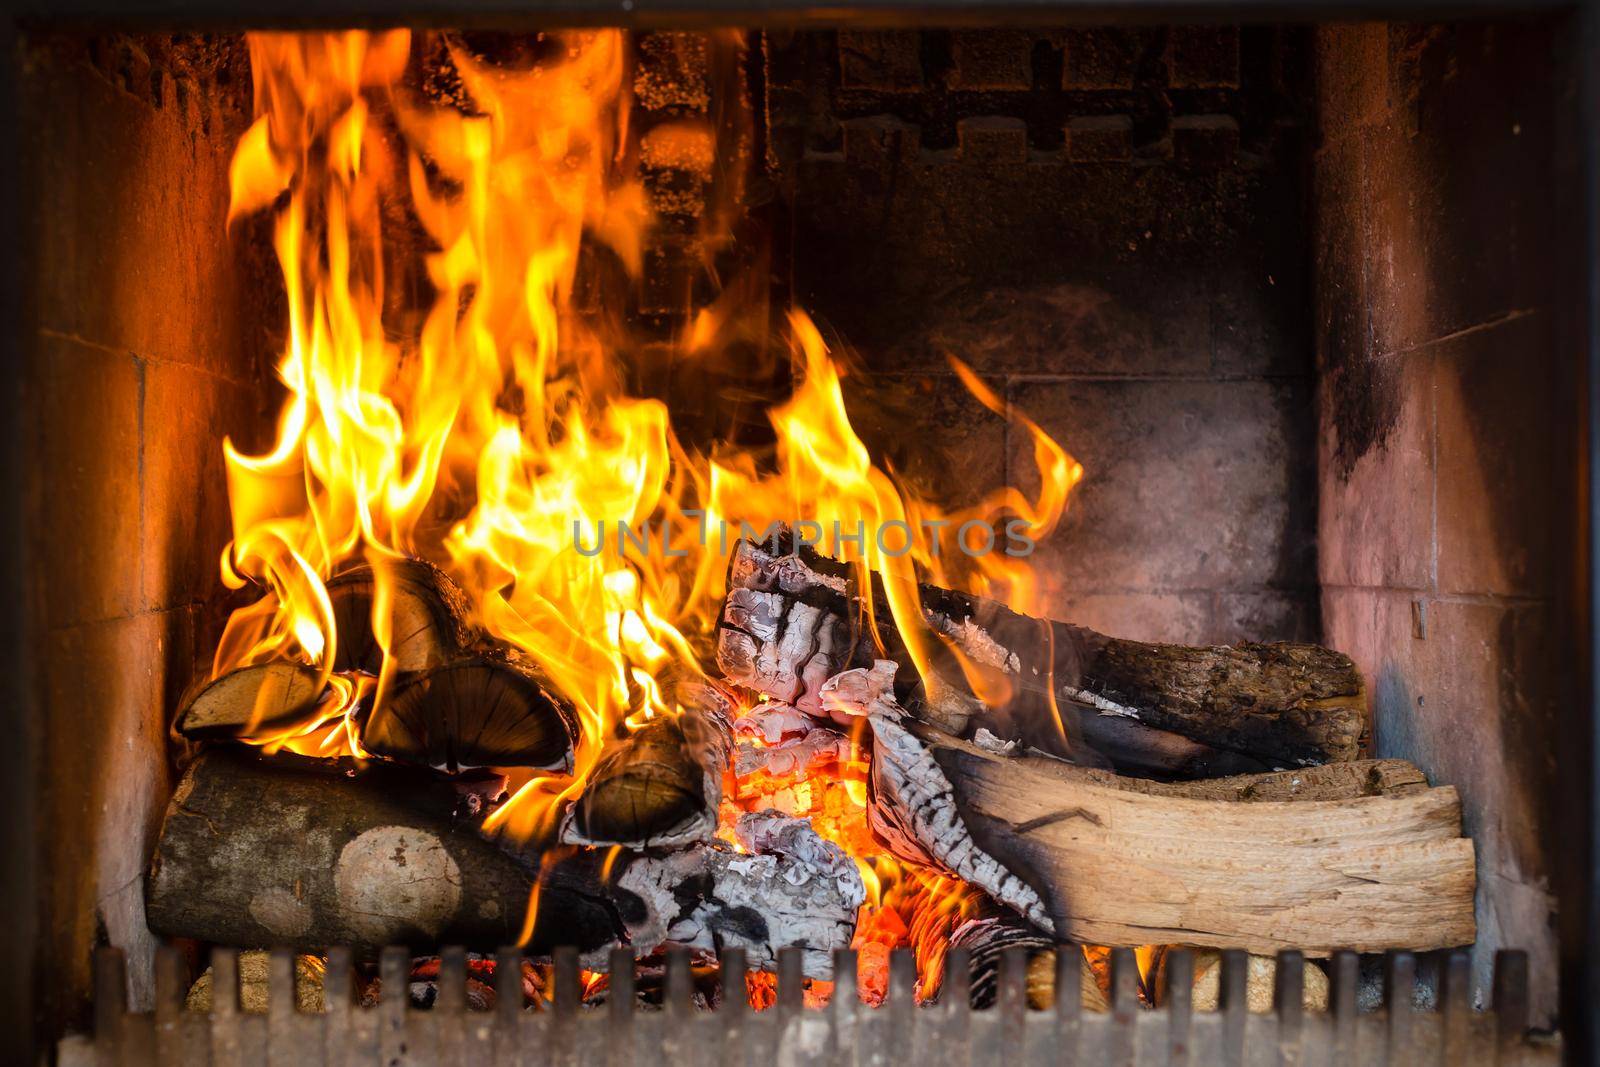 Fireplace or furnace invites you with its cozy blazing fire to warm up